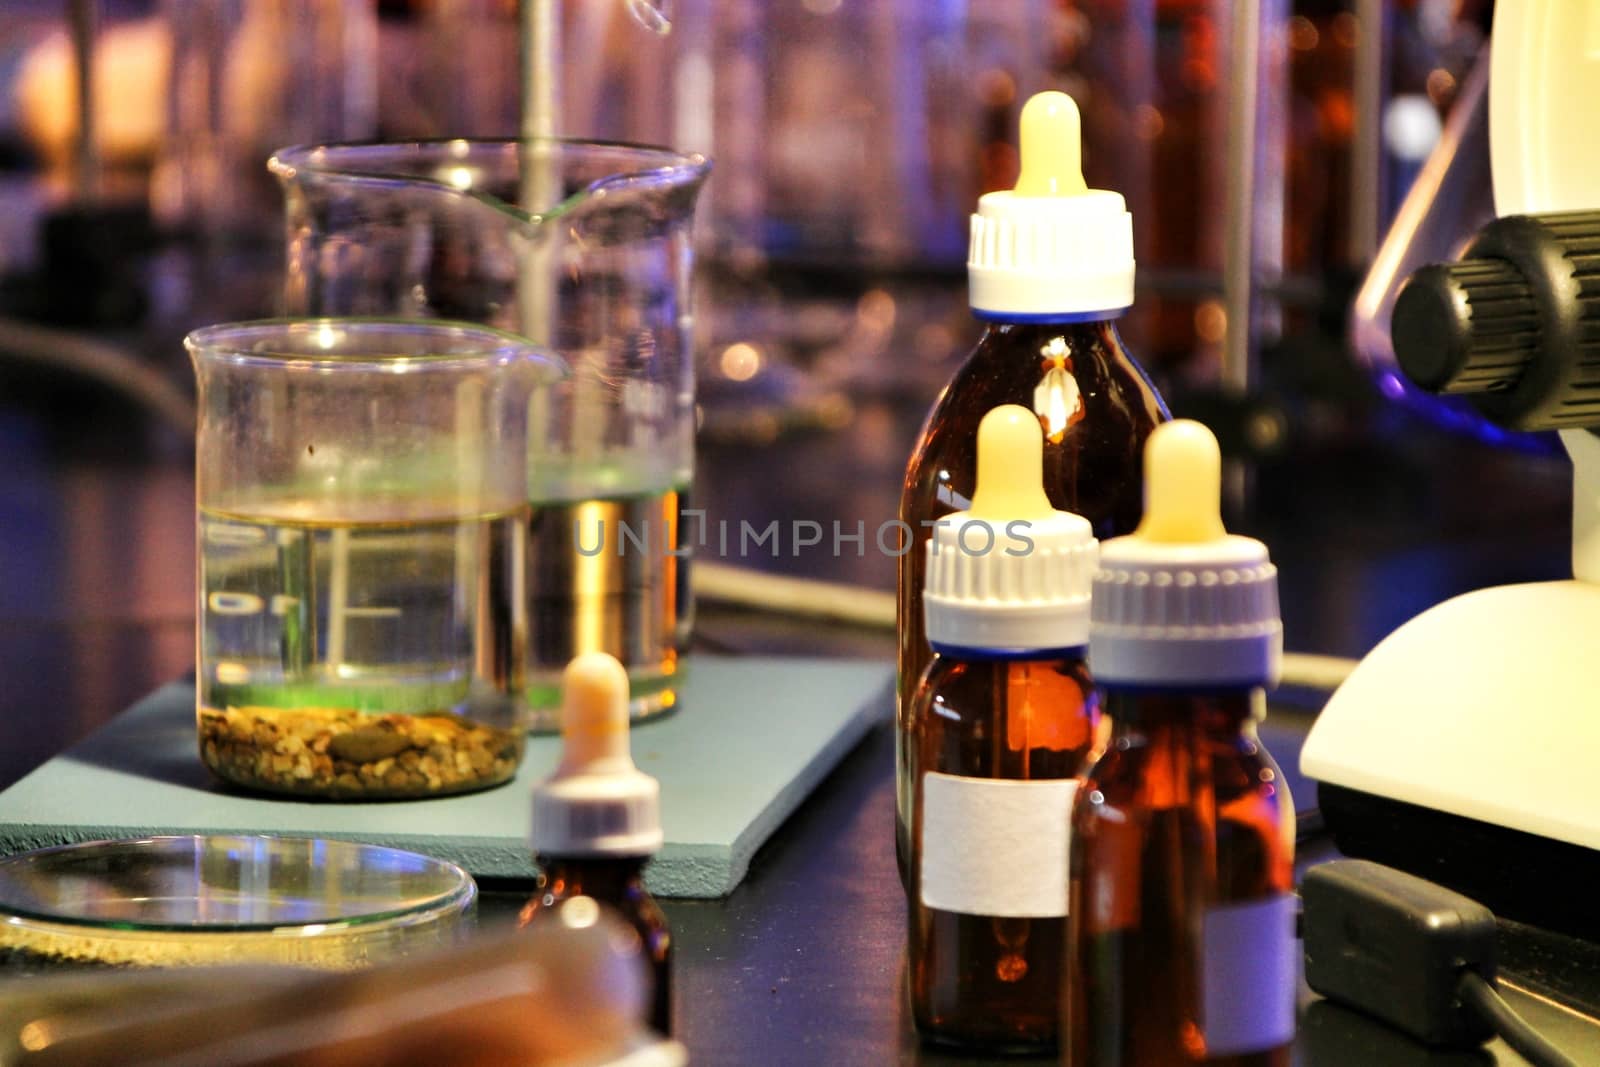 Test tubes and pots in a laboratory in Spain by soniabonet